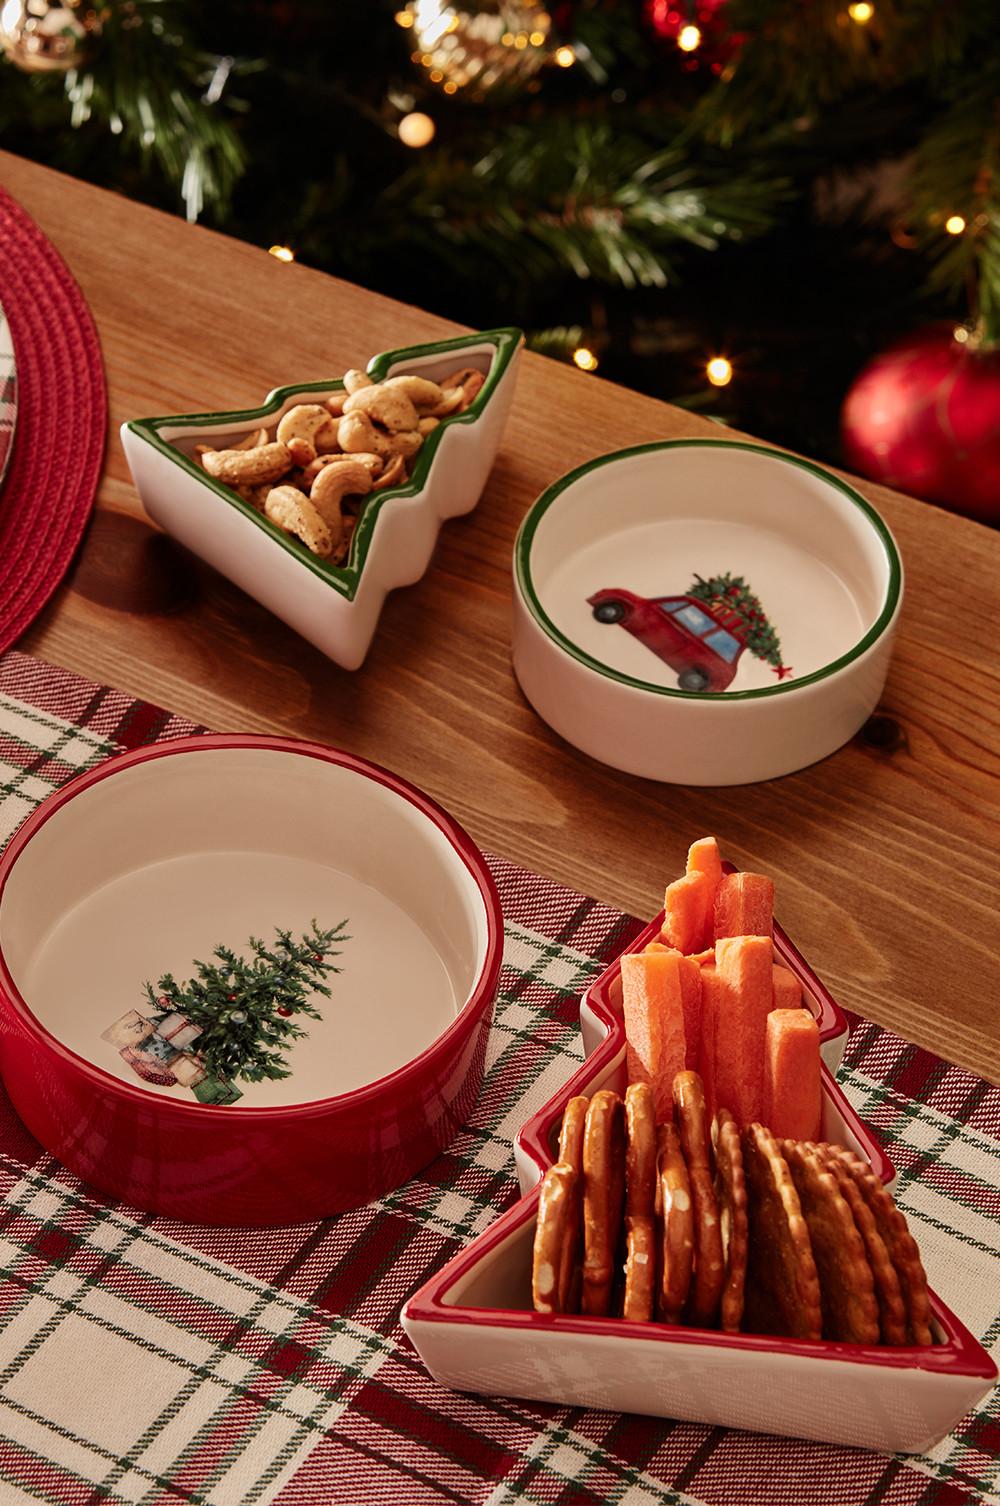 Christmas table with festive plates